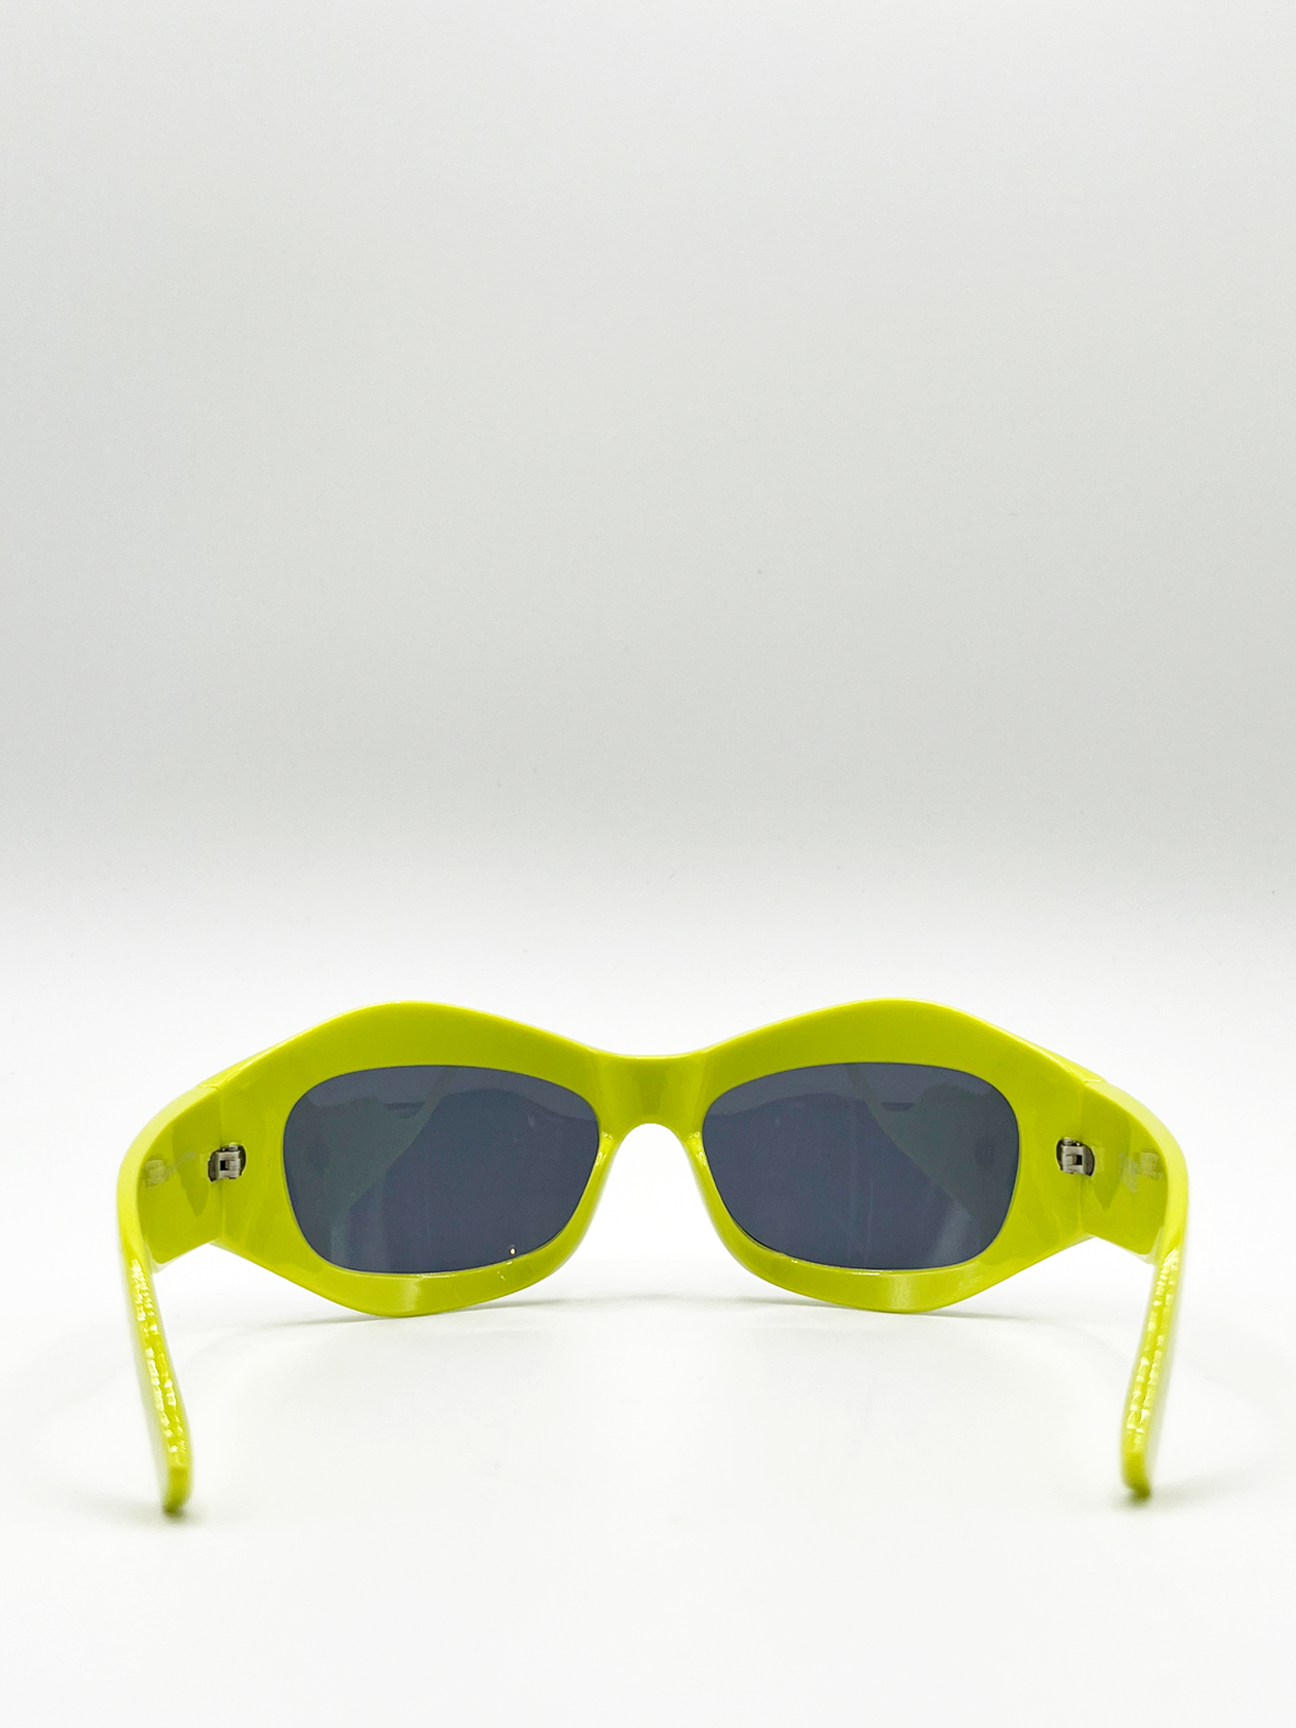 Green Exaggerated Brow Racer Style Sunglasses with Black Lenses